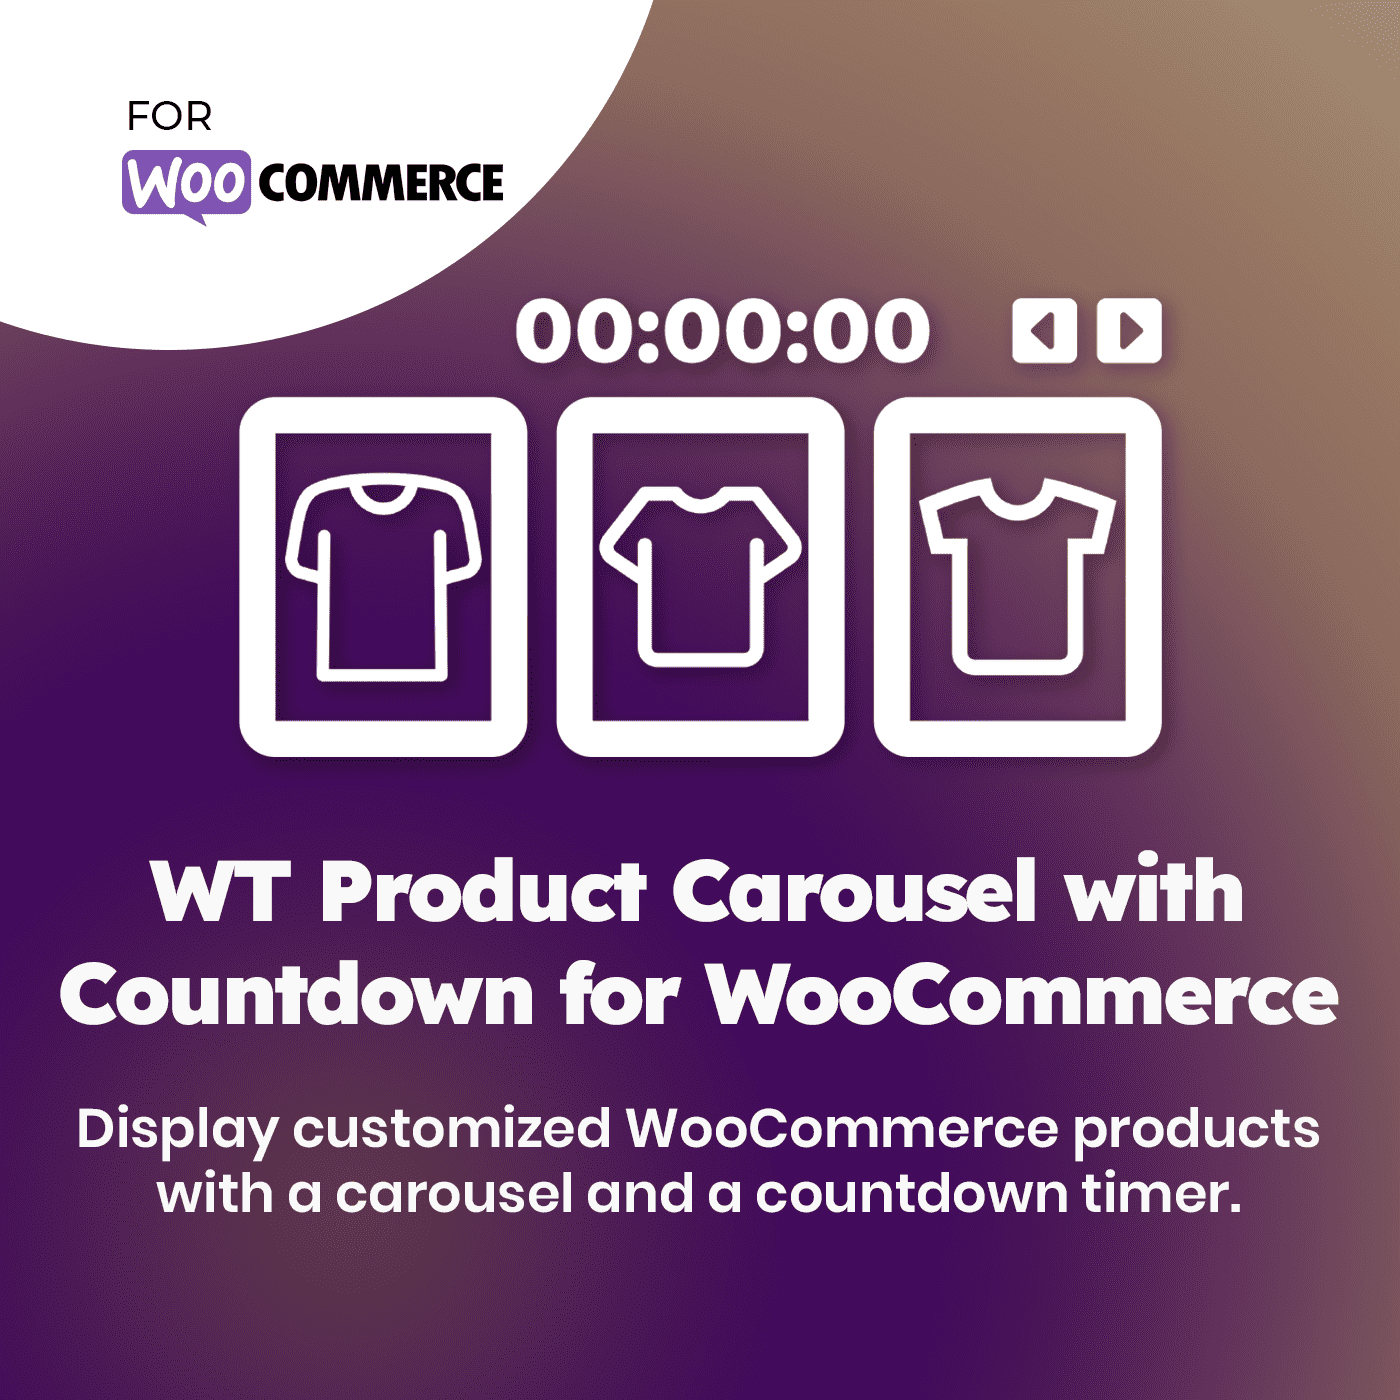 WT Product Carousel with Countdown for WooCommerce - WooCommerce Theme